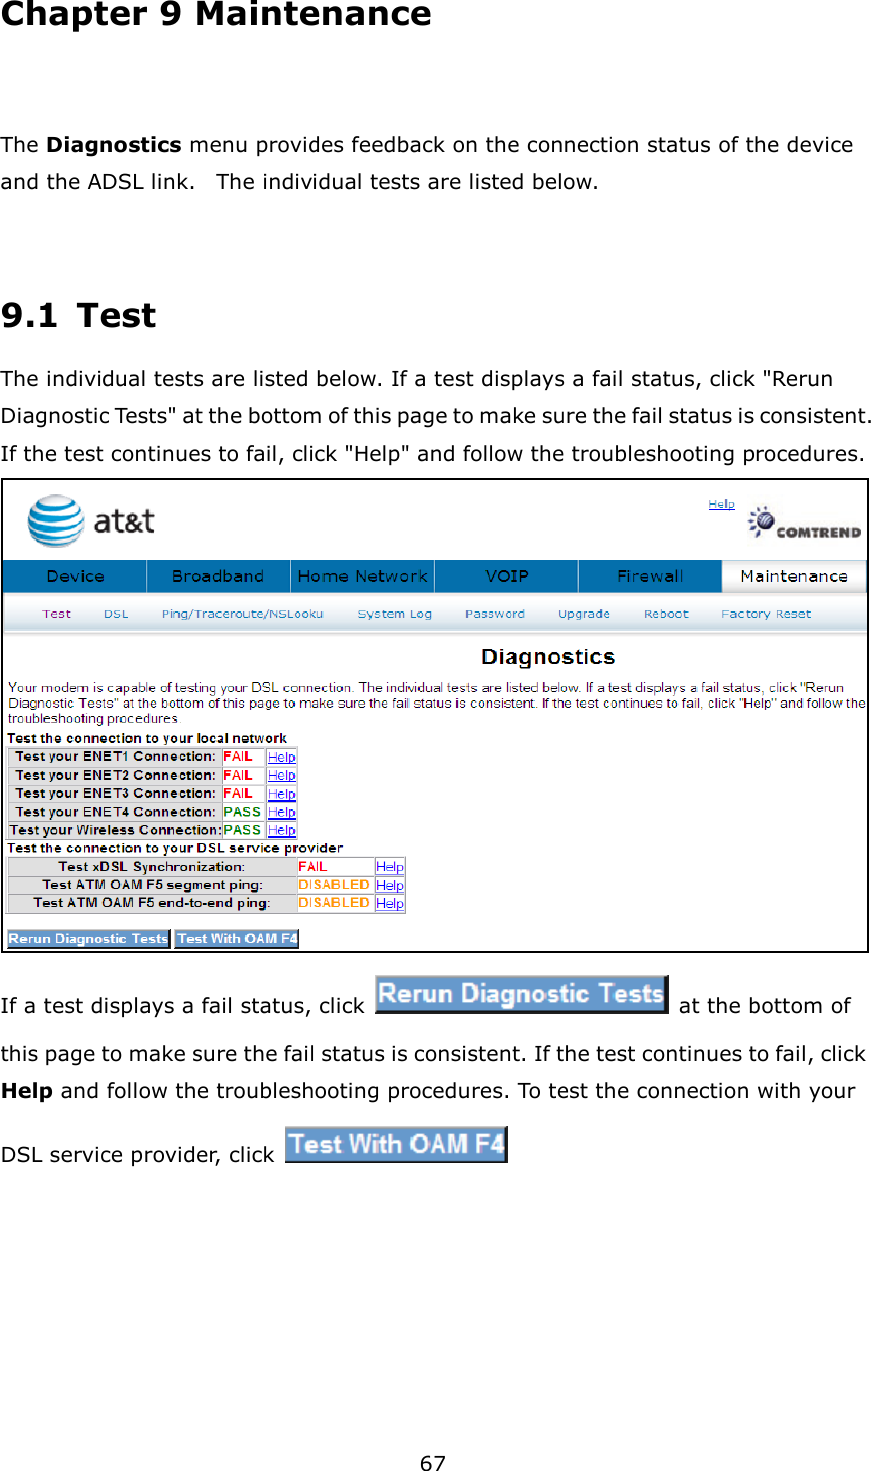 67 Chapter 9 Maintenance  The Diagnostics menu provides feedback on the connection status of the device and the ADSL link.    The individual tests are listed below.    9.1  Test The individual tests are listed below. If a test displays a fail status, click &quot;Rerun Diagnostic Tests&quot; at the bottom of this page to make sure the fail status is consistent. If the test continues to fail, click &quot;Help&quot; and follow the troubleshooting procedures.  If a test displays a fail status, click   at the bottom of this page to make sure the fail status is consistent. If the test continues to fail, click Help and follow the troubleshooting procedures. To test the connection with your DSL service provider, click         